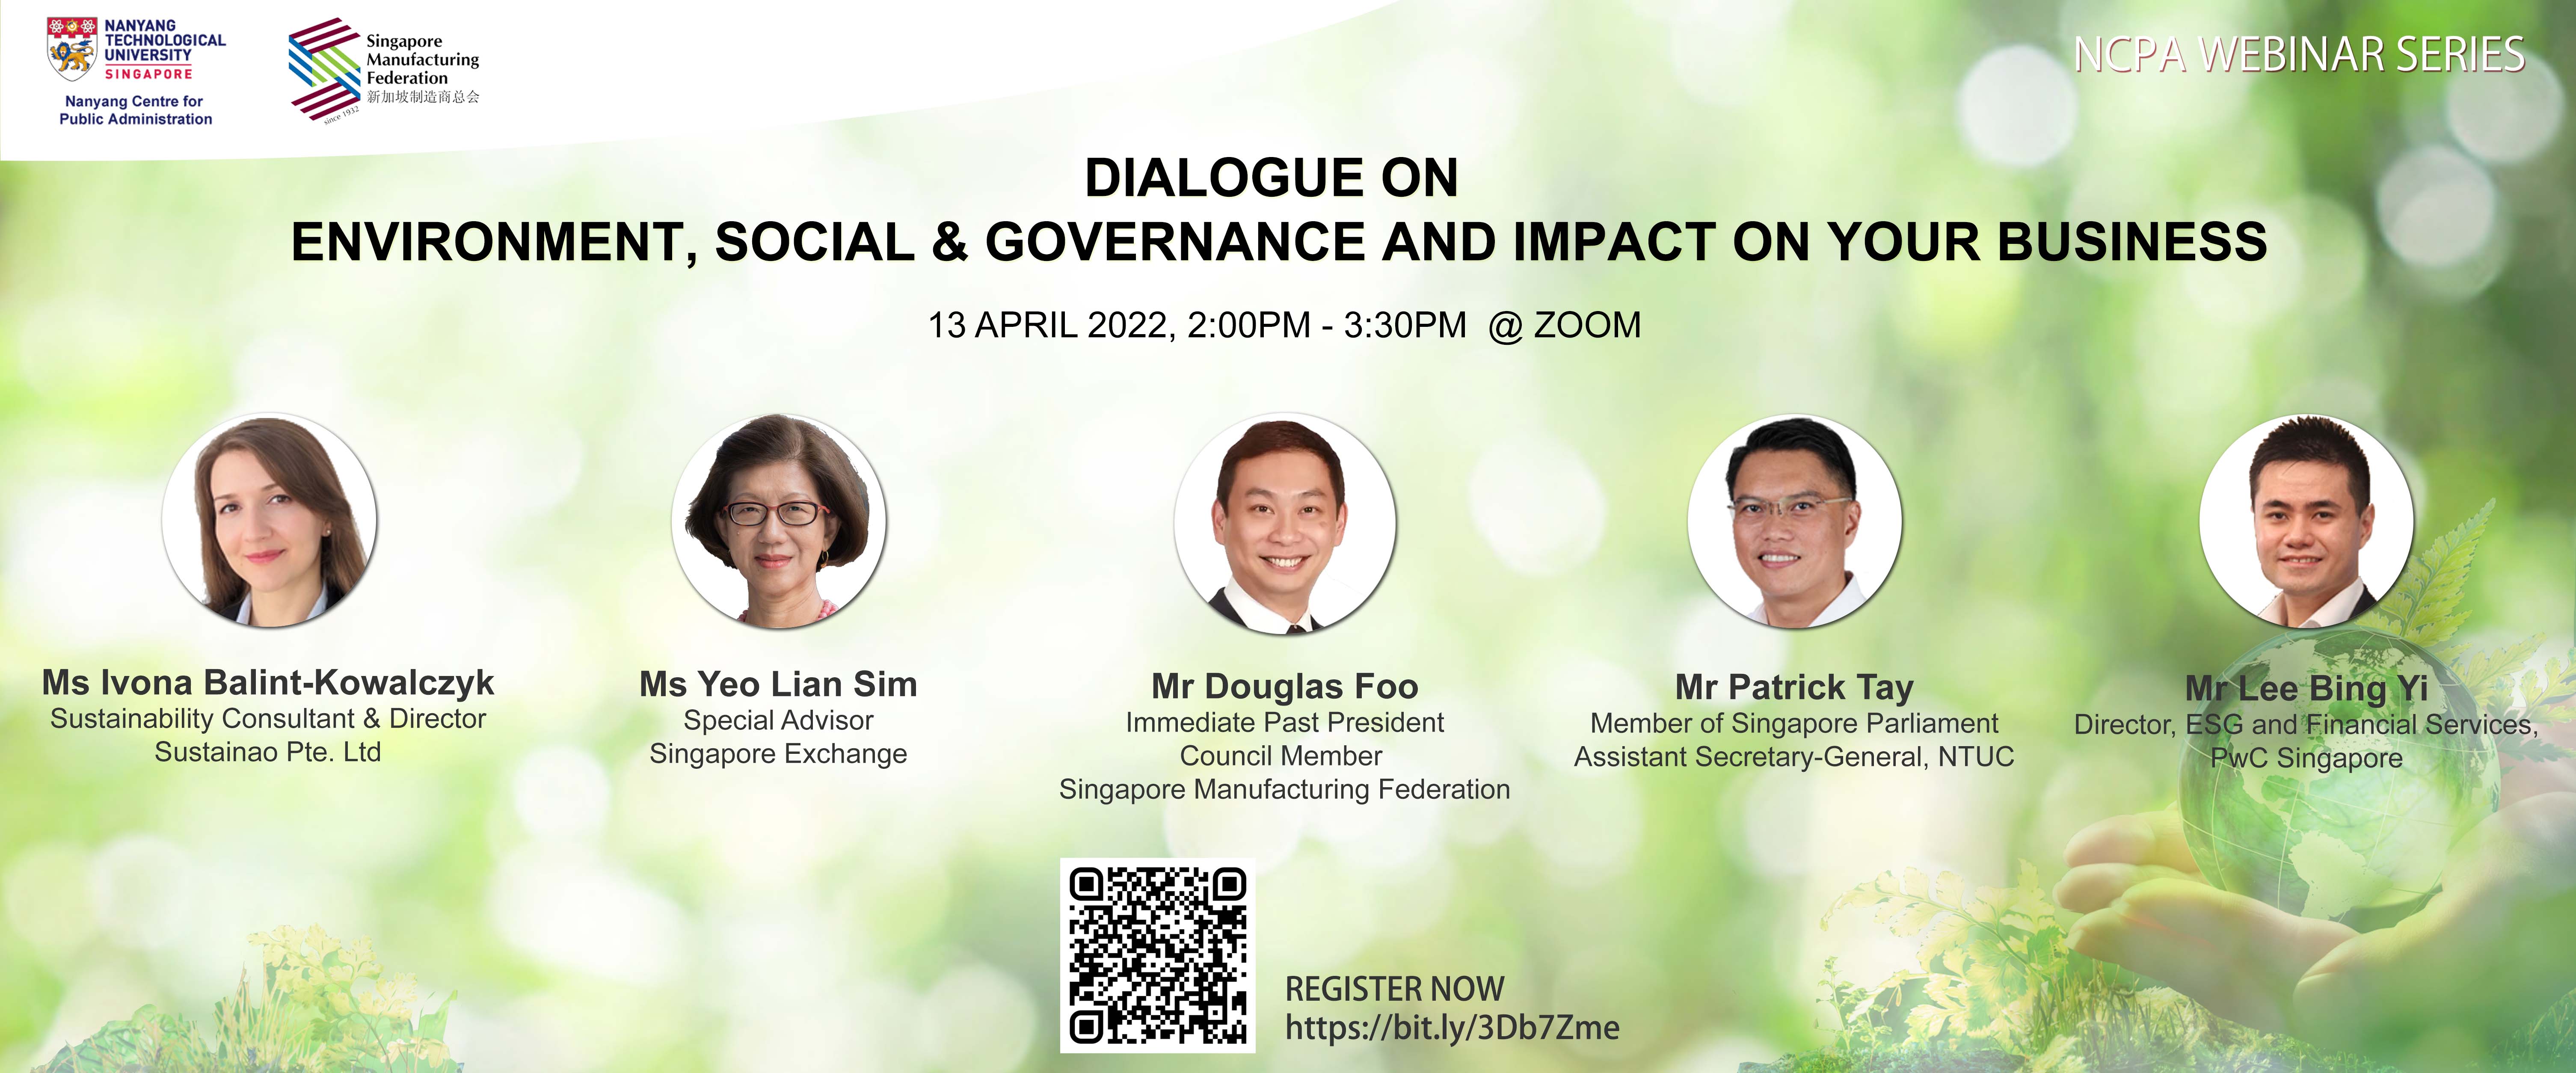 Dialogue on Environment, Social and Governance and Impact on Your Business